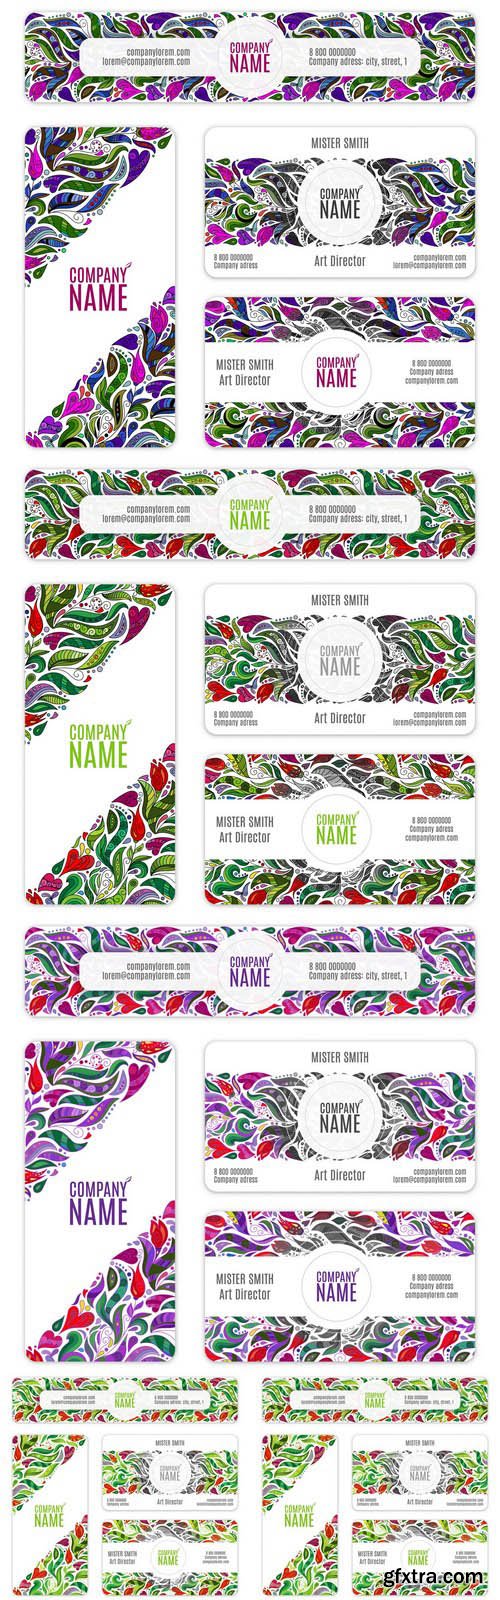 Abstract Flowers Pattern Banners - 5 Vector